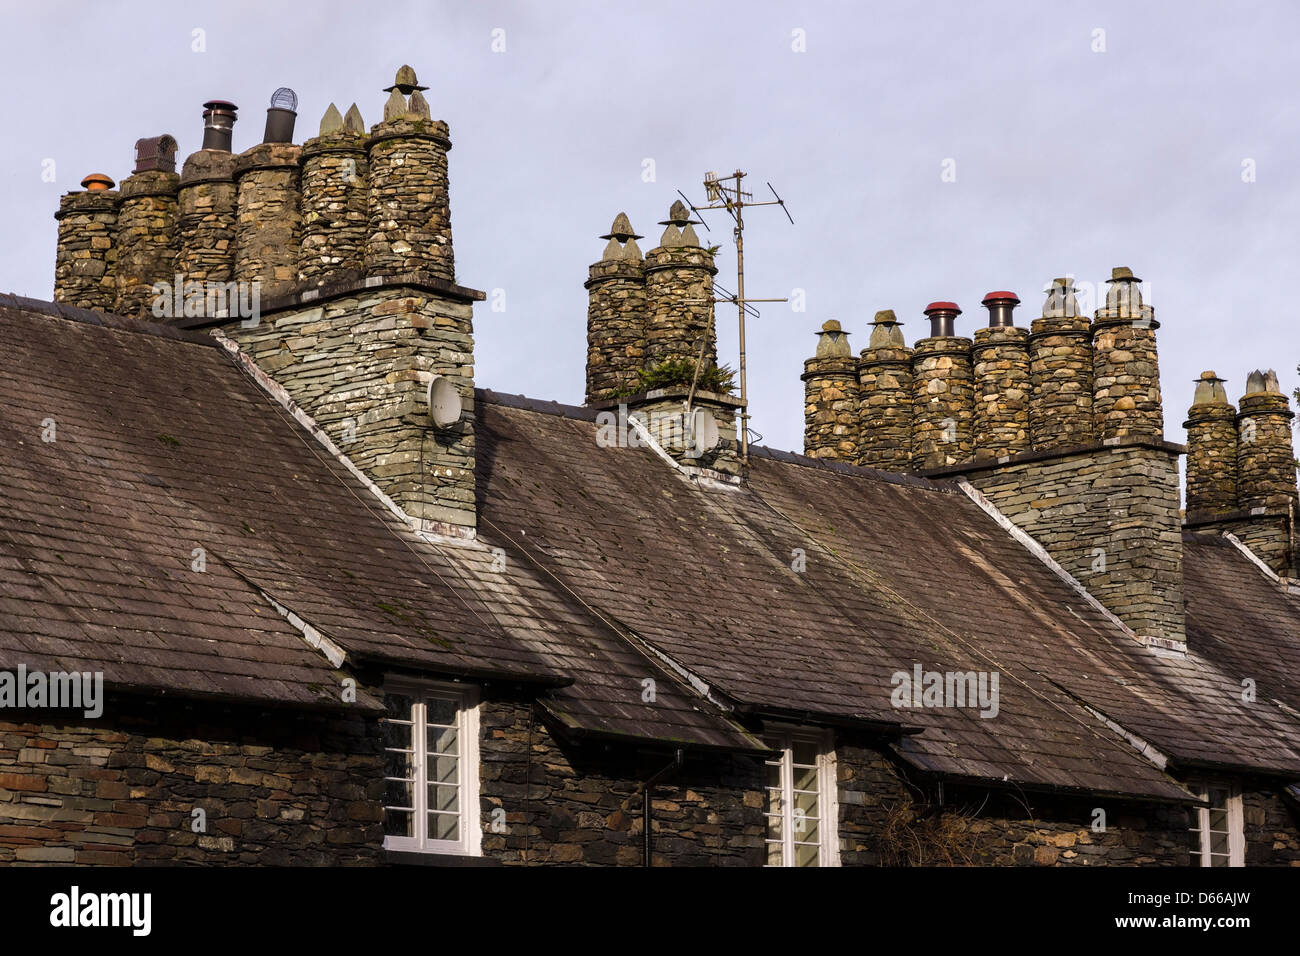 Slate drystone square chimney stacks and round pots above terraced lakeland cottage roofs, Skelwith, Cumbria, England, UK Stock Photo